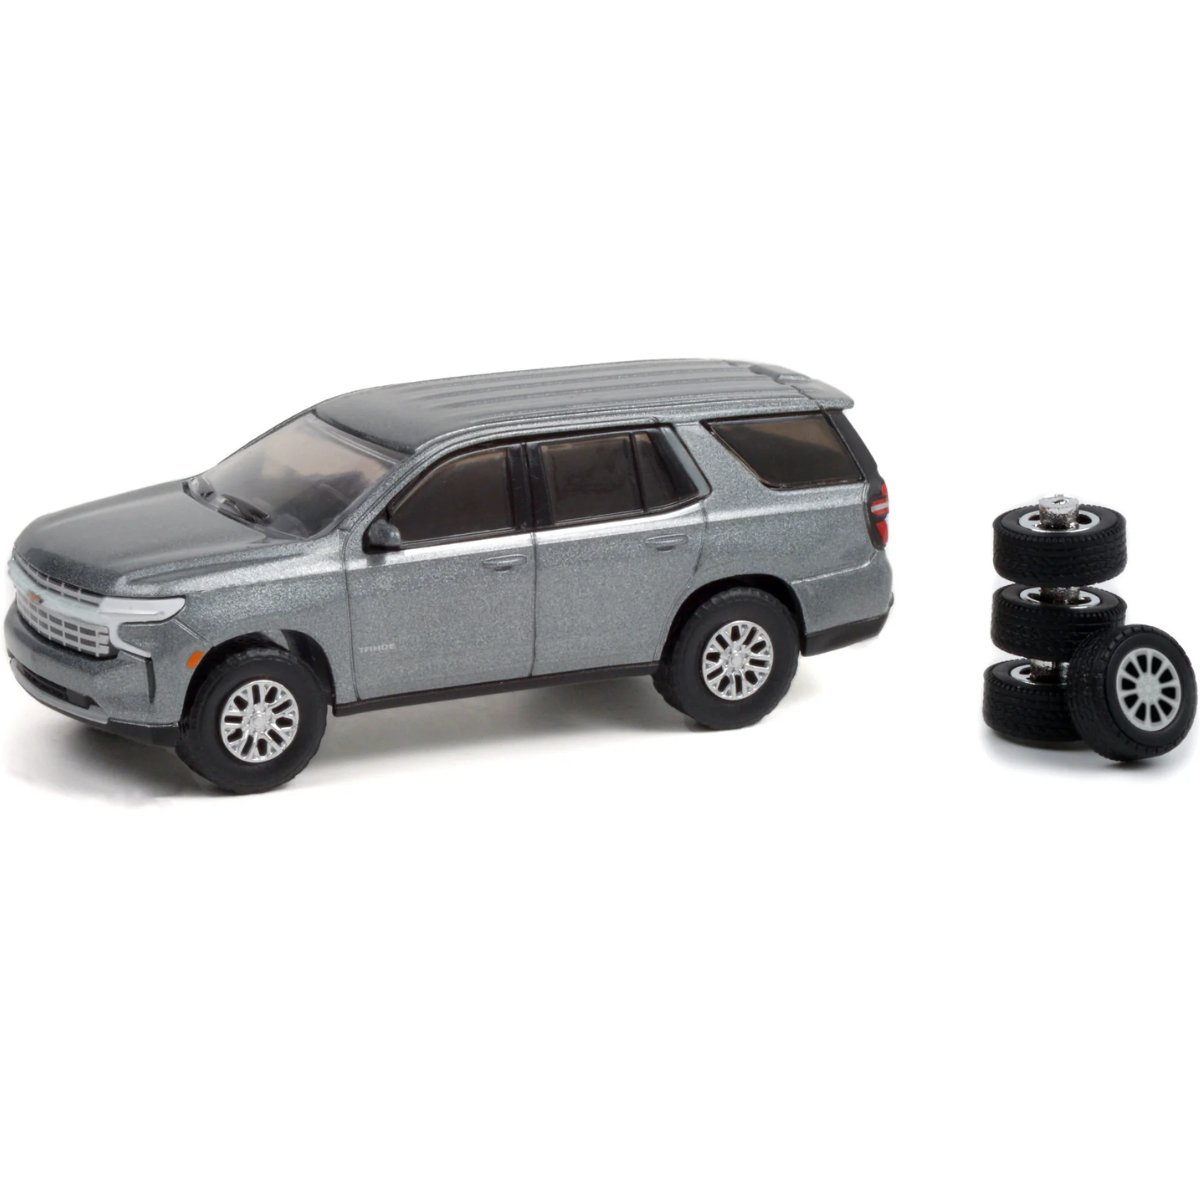 Greenlight 2021 Chevrolet Tahoe With Spare Tyres - 1:64 Scale